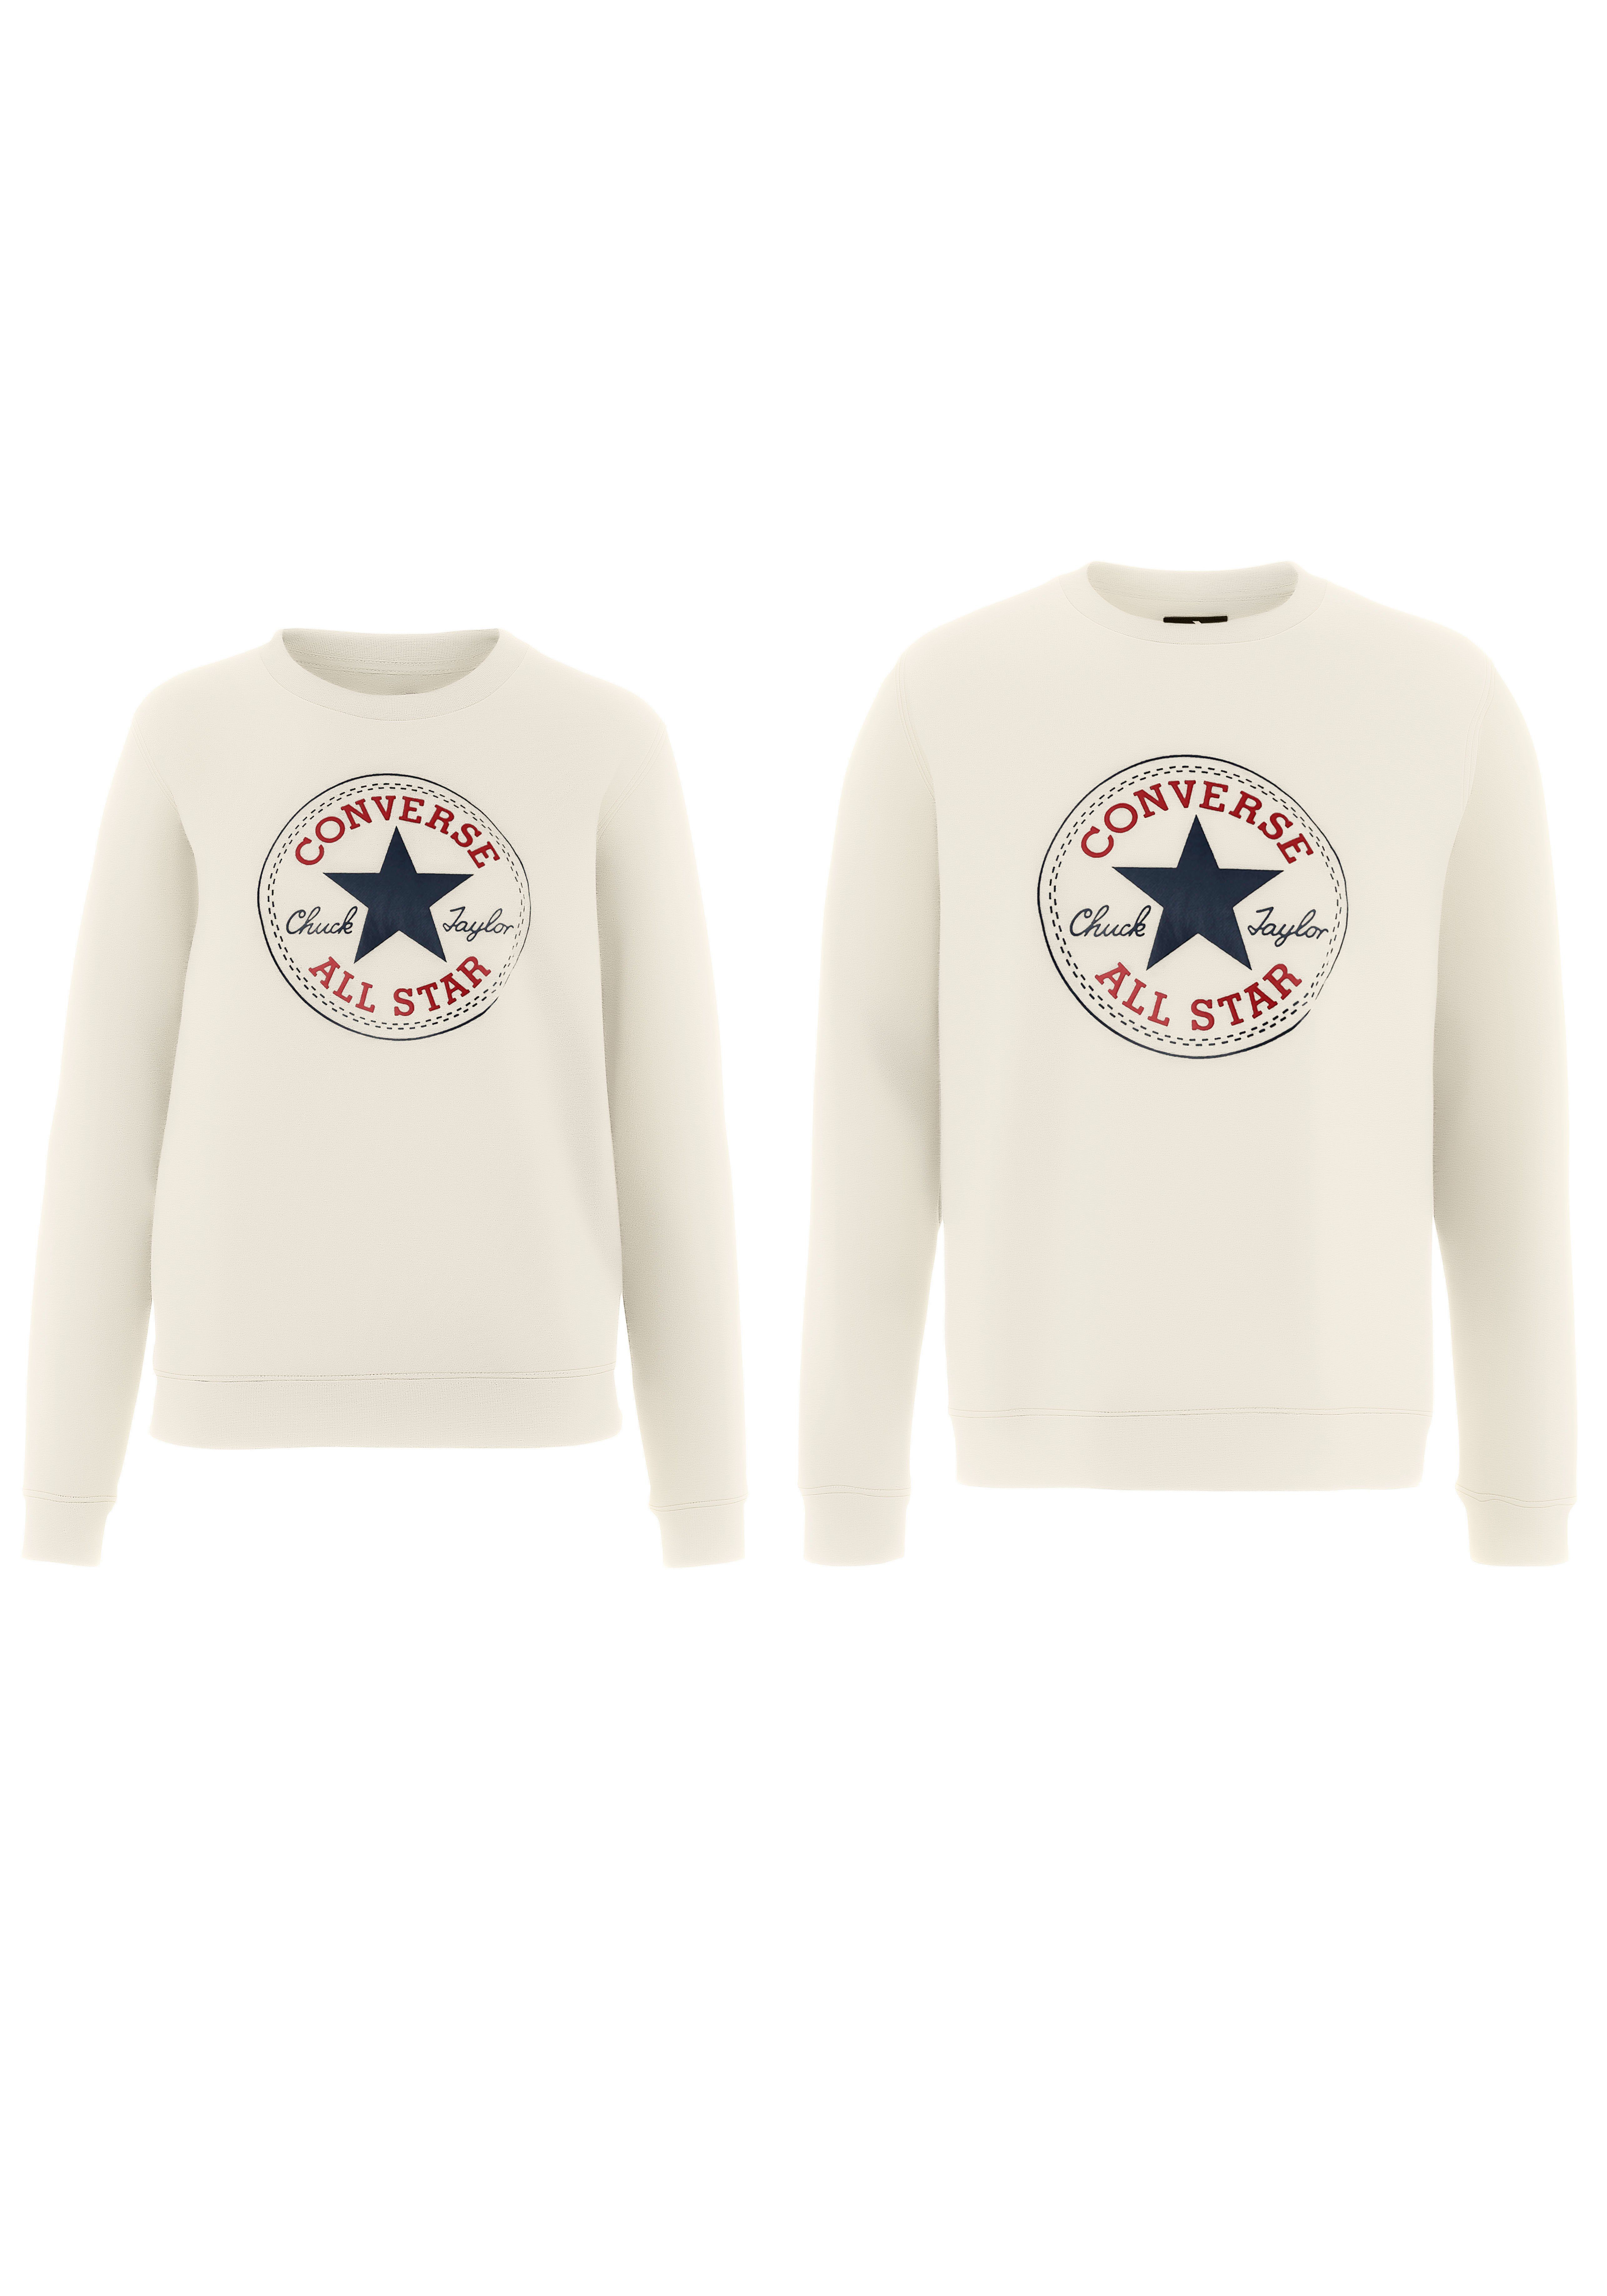 ALL EGR Sweatshirt STAR UNISEX PATCH Converse BACK BRUSHED